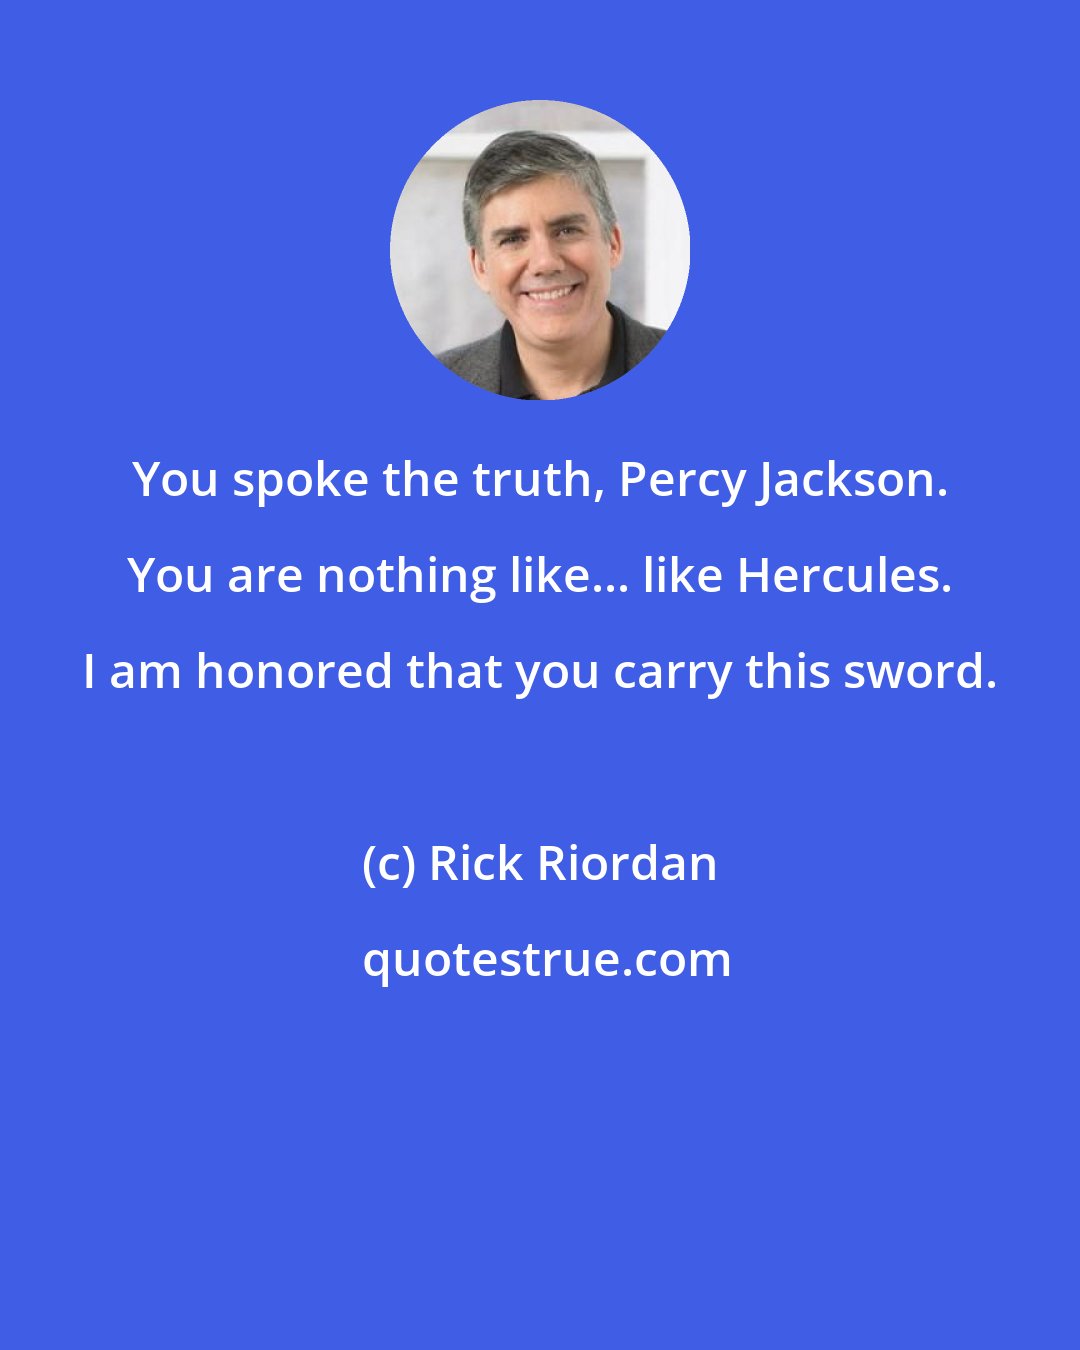 Rick Riordan: You spoke the truth, Percy Jackson. You are nothing like... like Hercules. I am honored that you carry this sword.